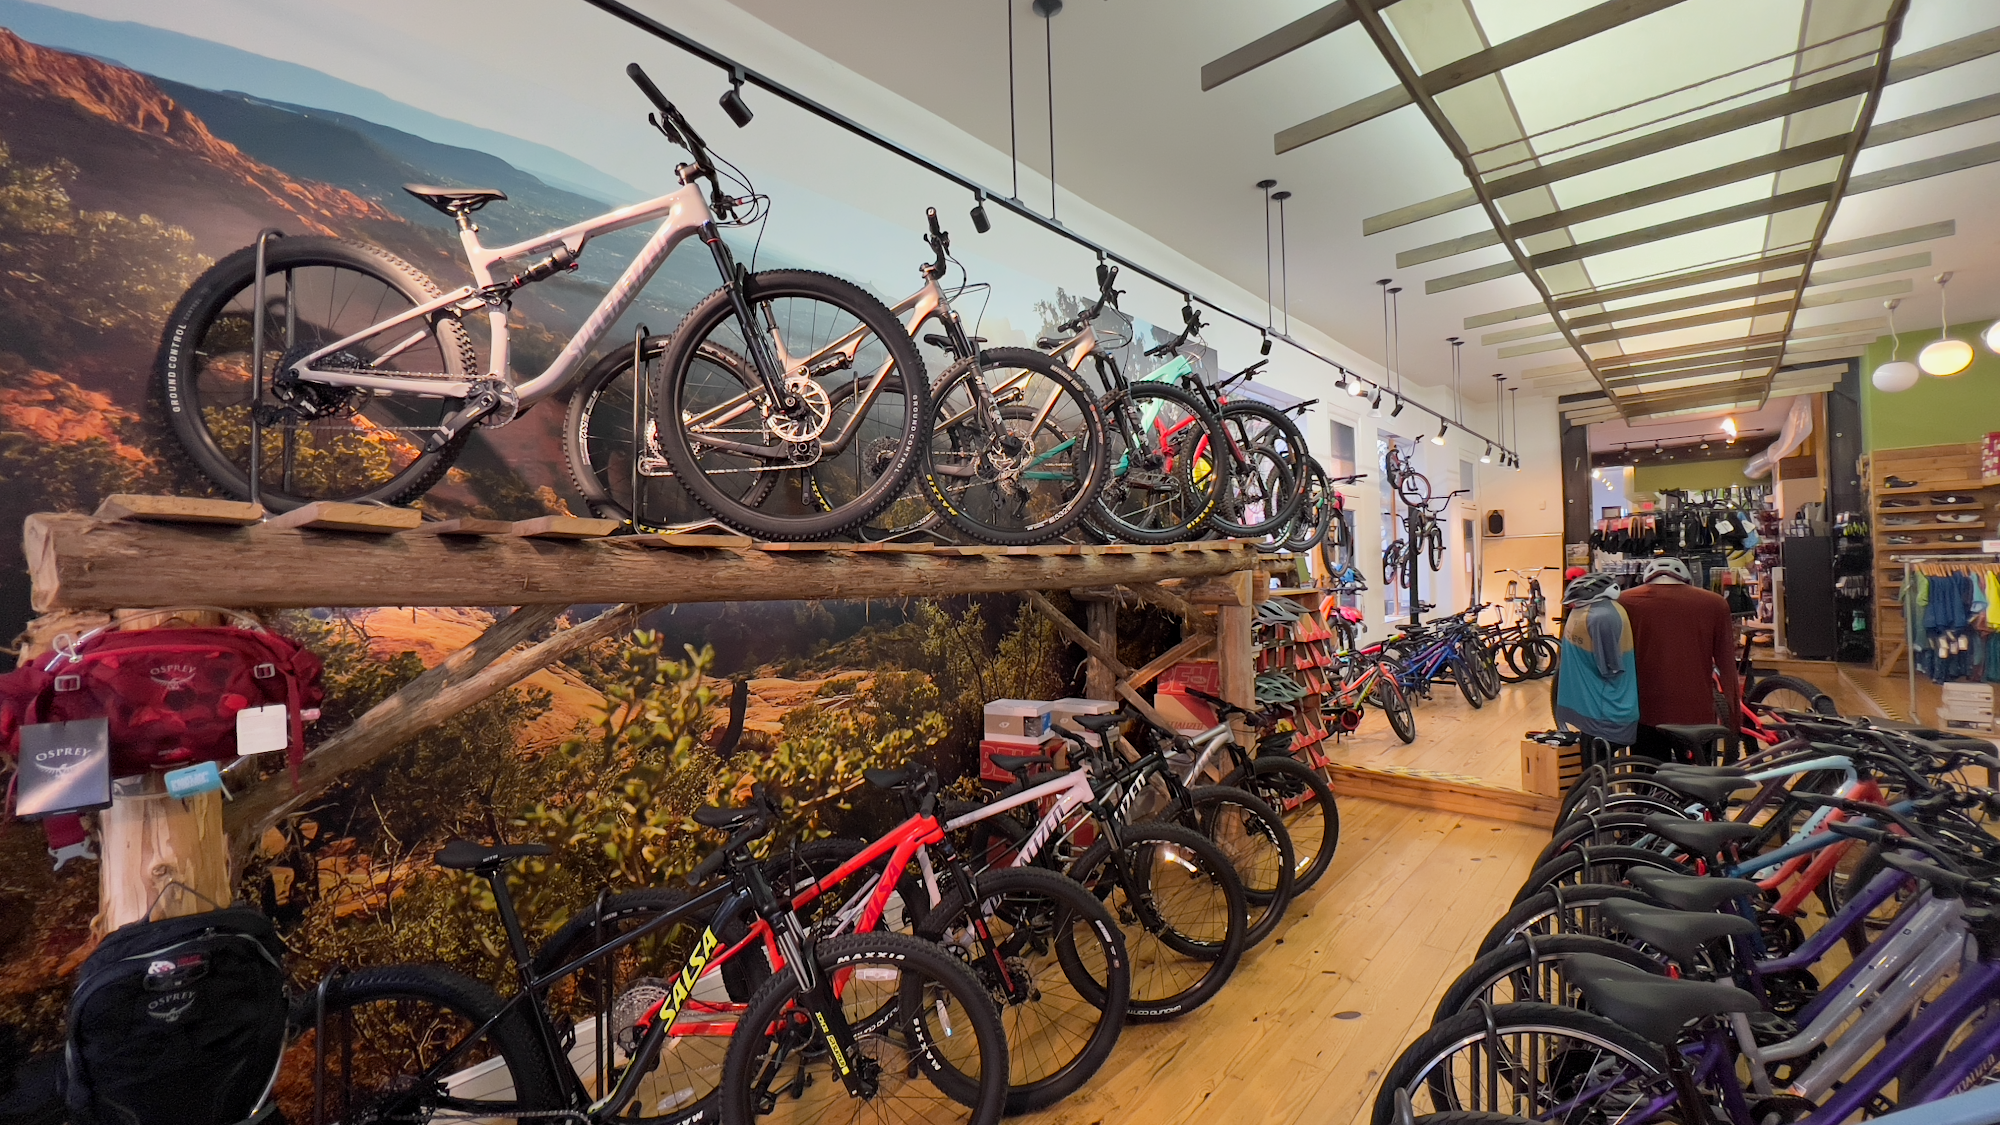 Reser Bicycle Outfitters